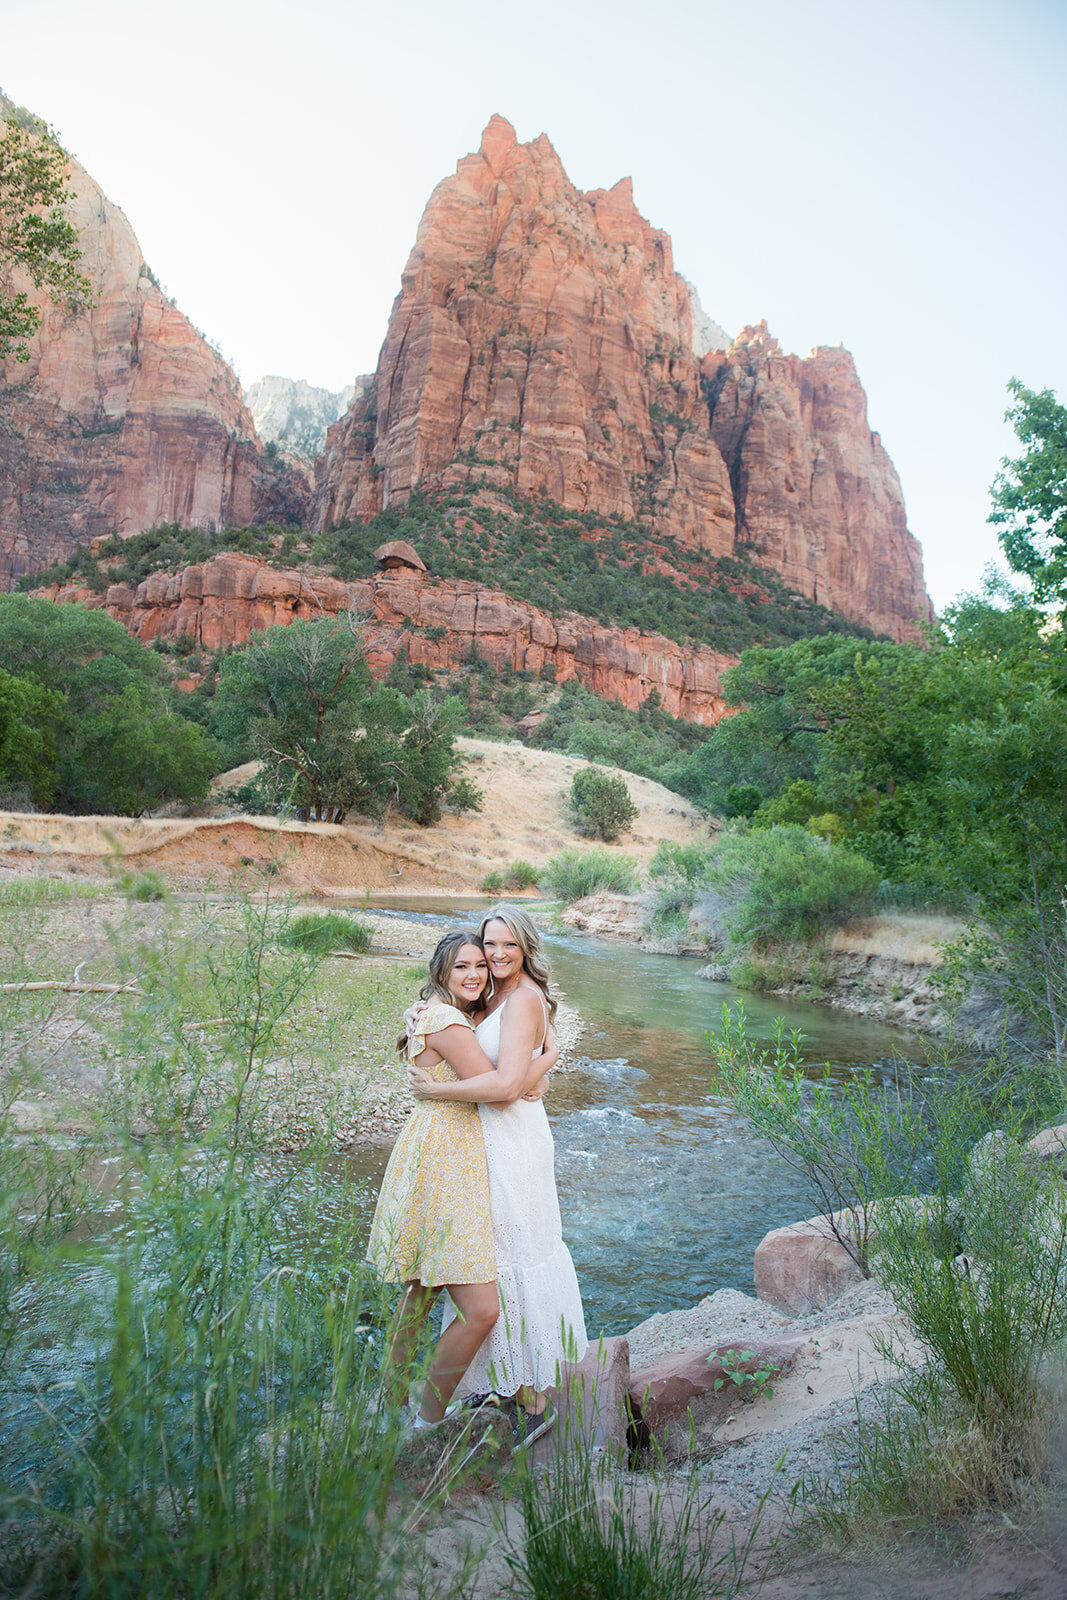 zion-national-park-family-photographer-wild-within-us (7)